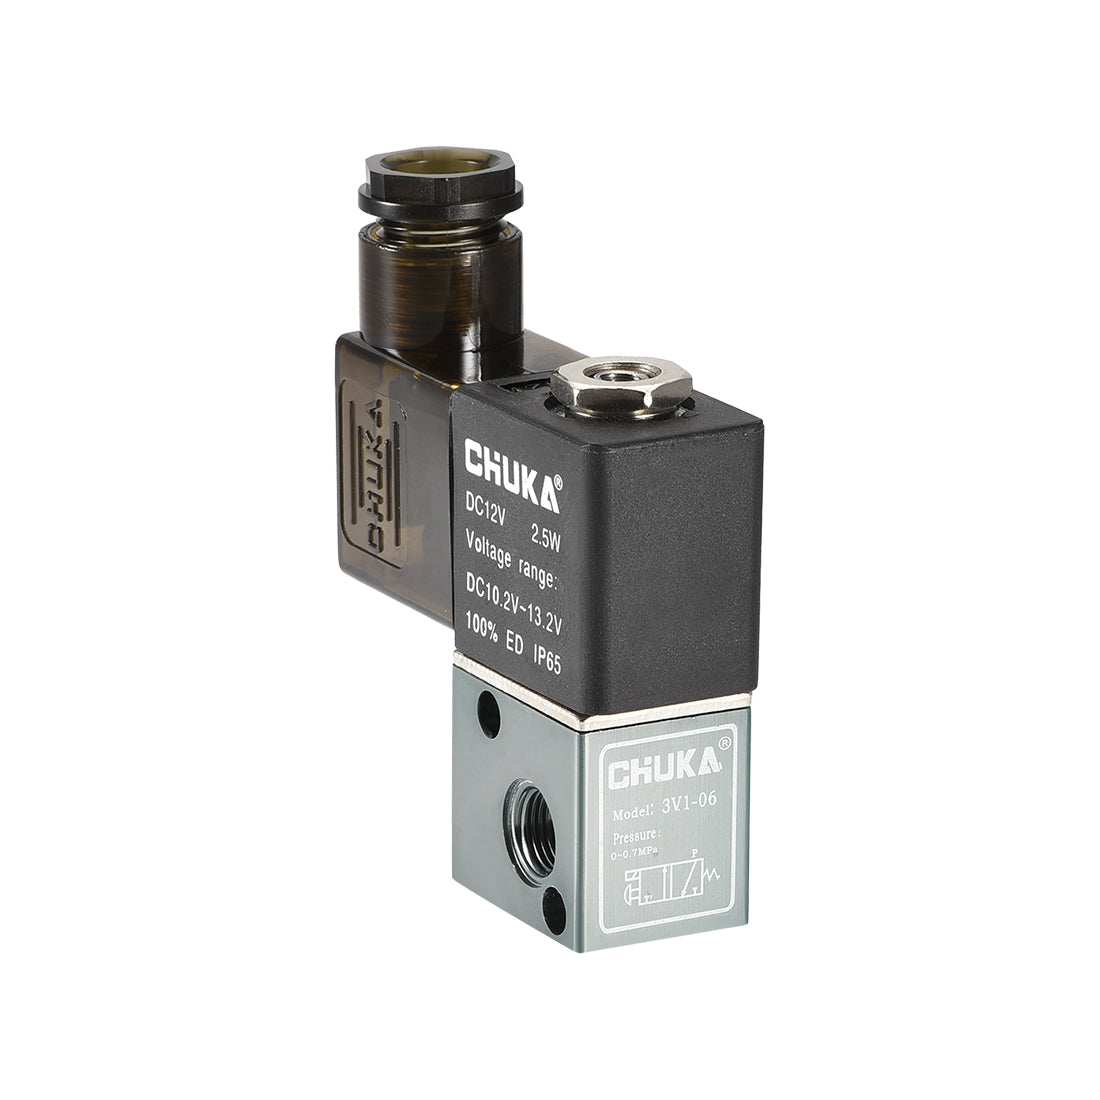 uxcell Uxcell 3V1-06 Pneumatic Air NC Single Electrical Control Solenoid Valve DC 12V 3 Way 2 Position 1/8" PT Thread Internally Acting Type